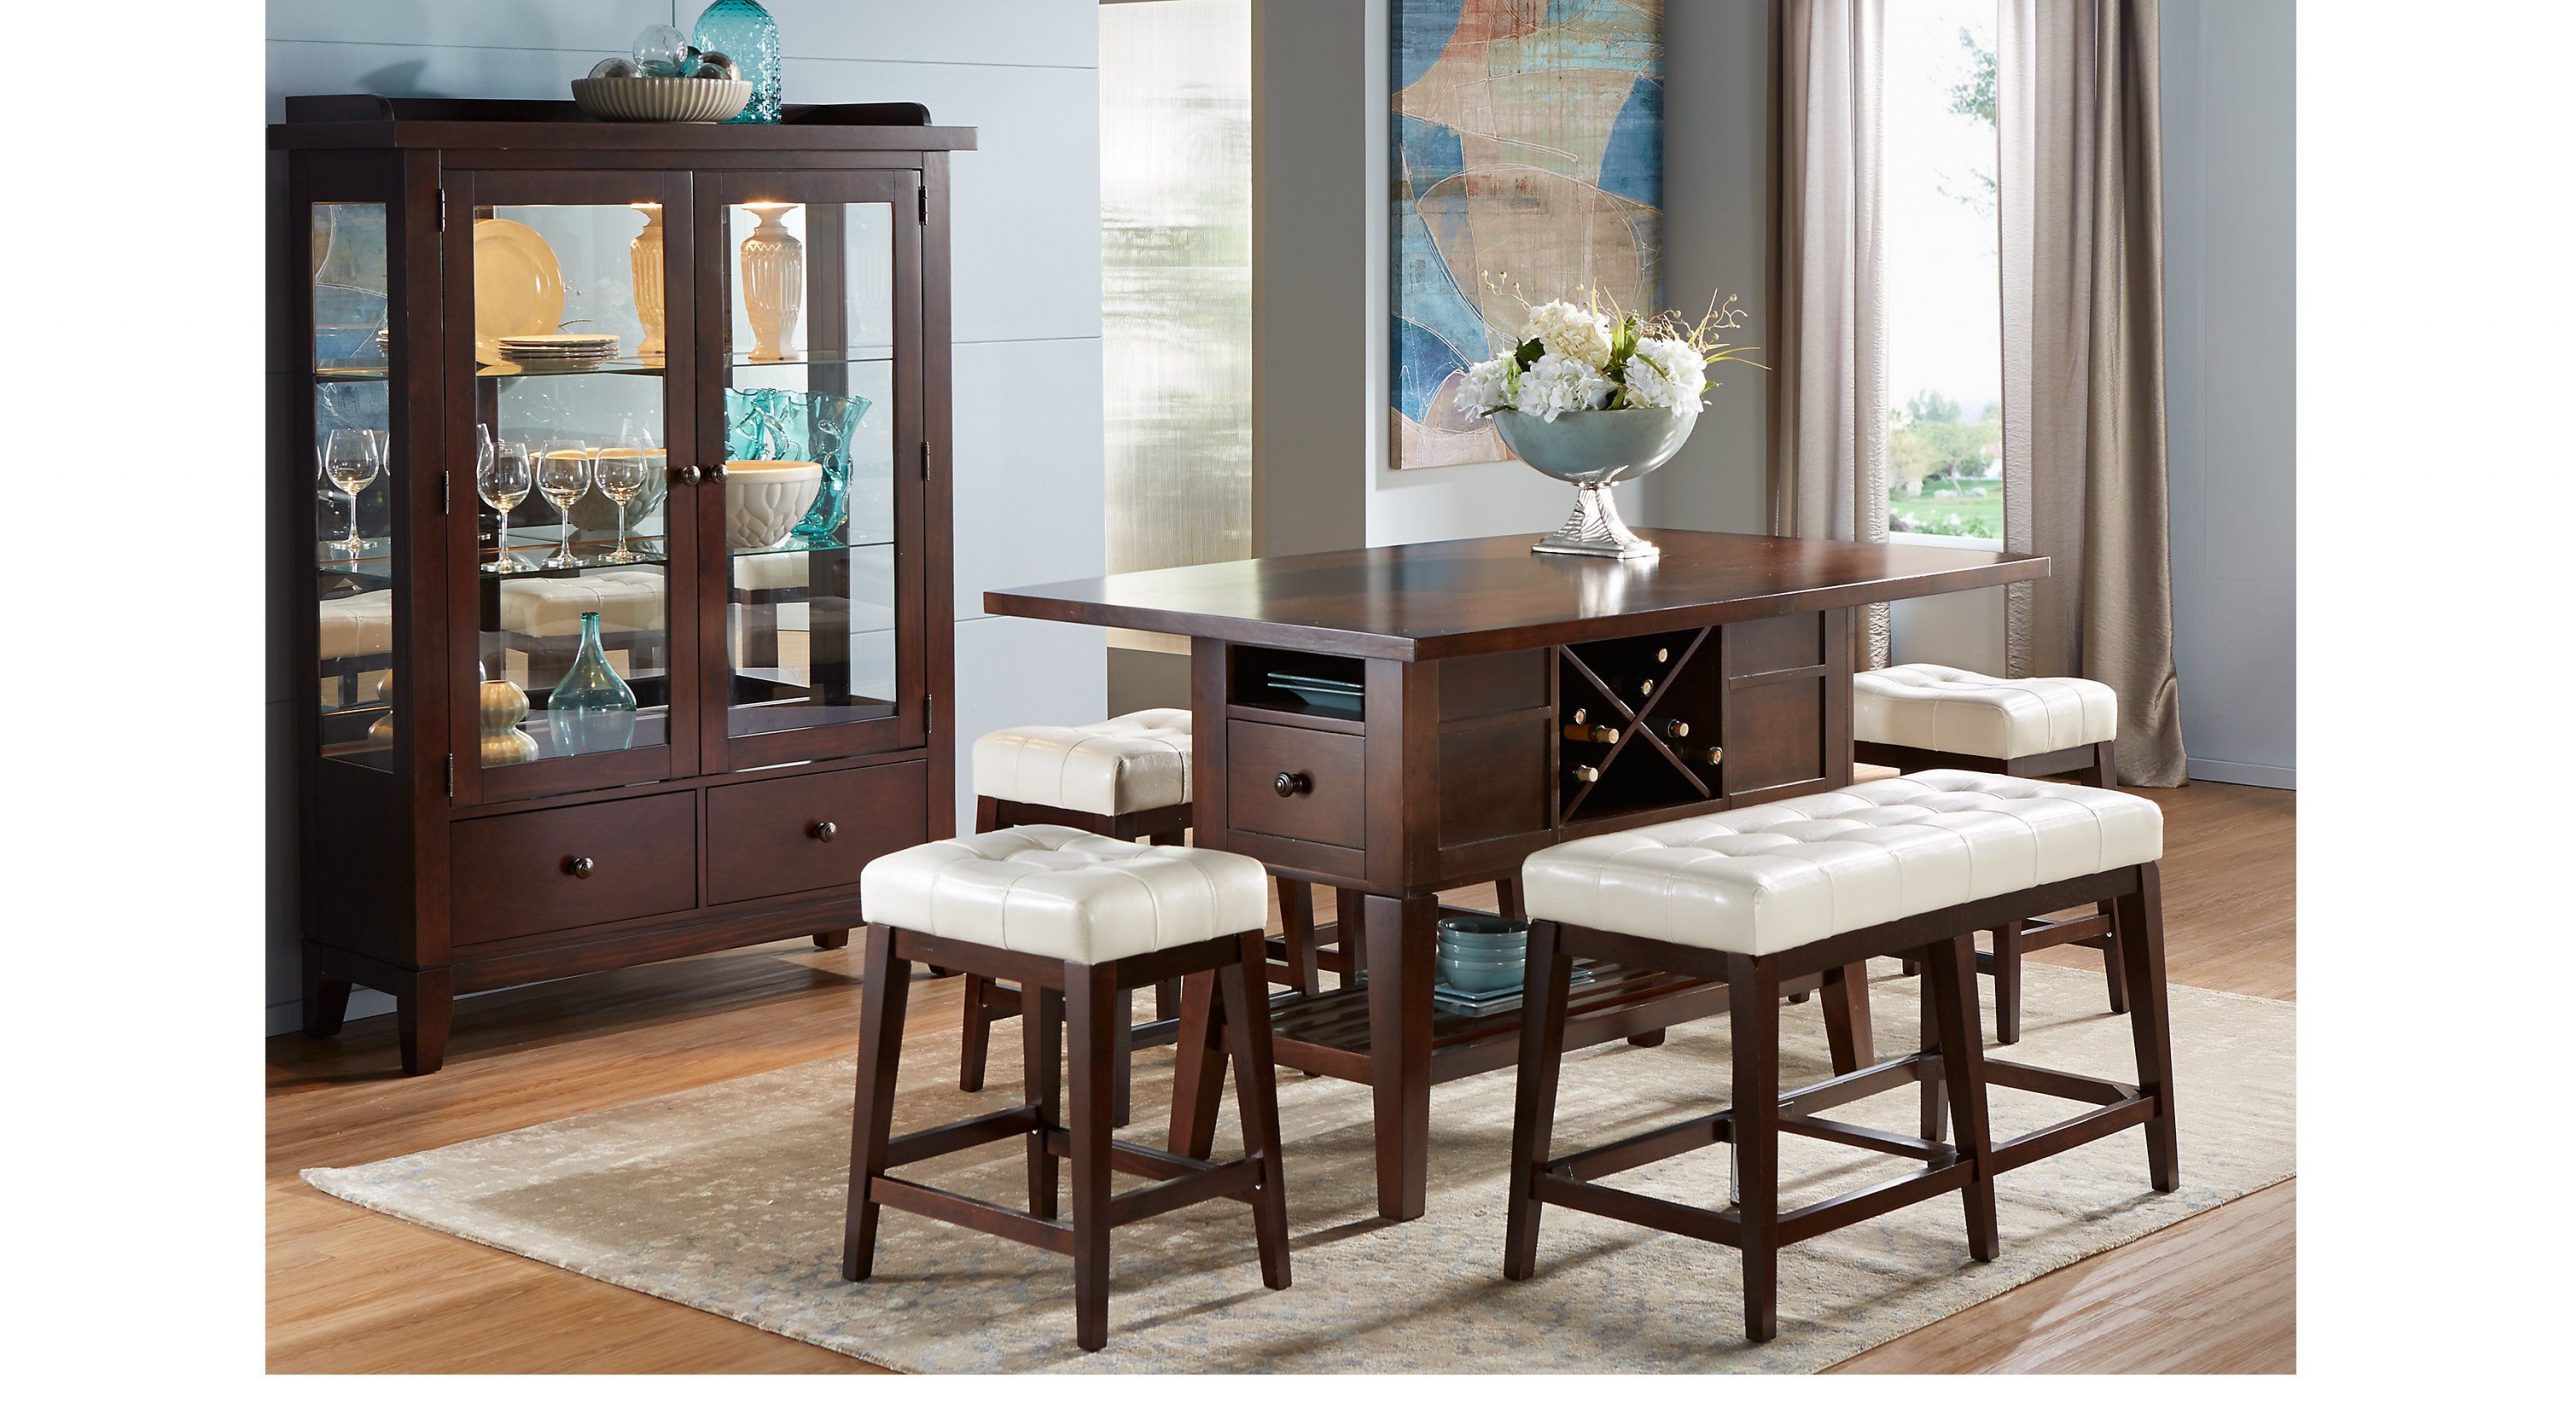 Julian Place Chocolate Vanilla 5 Pc Counter Height Dining intended for measurements 3000 X 1663